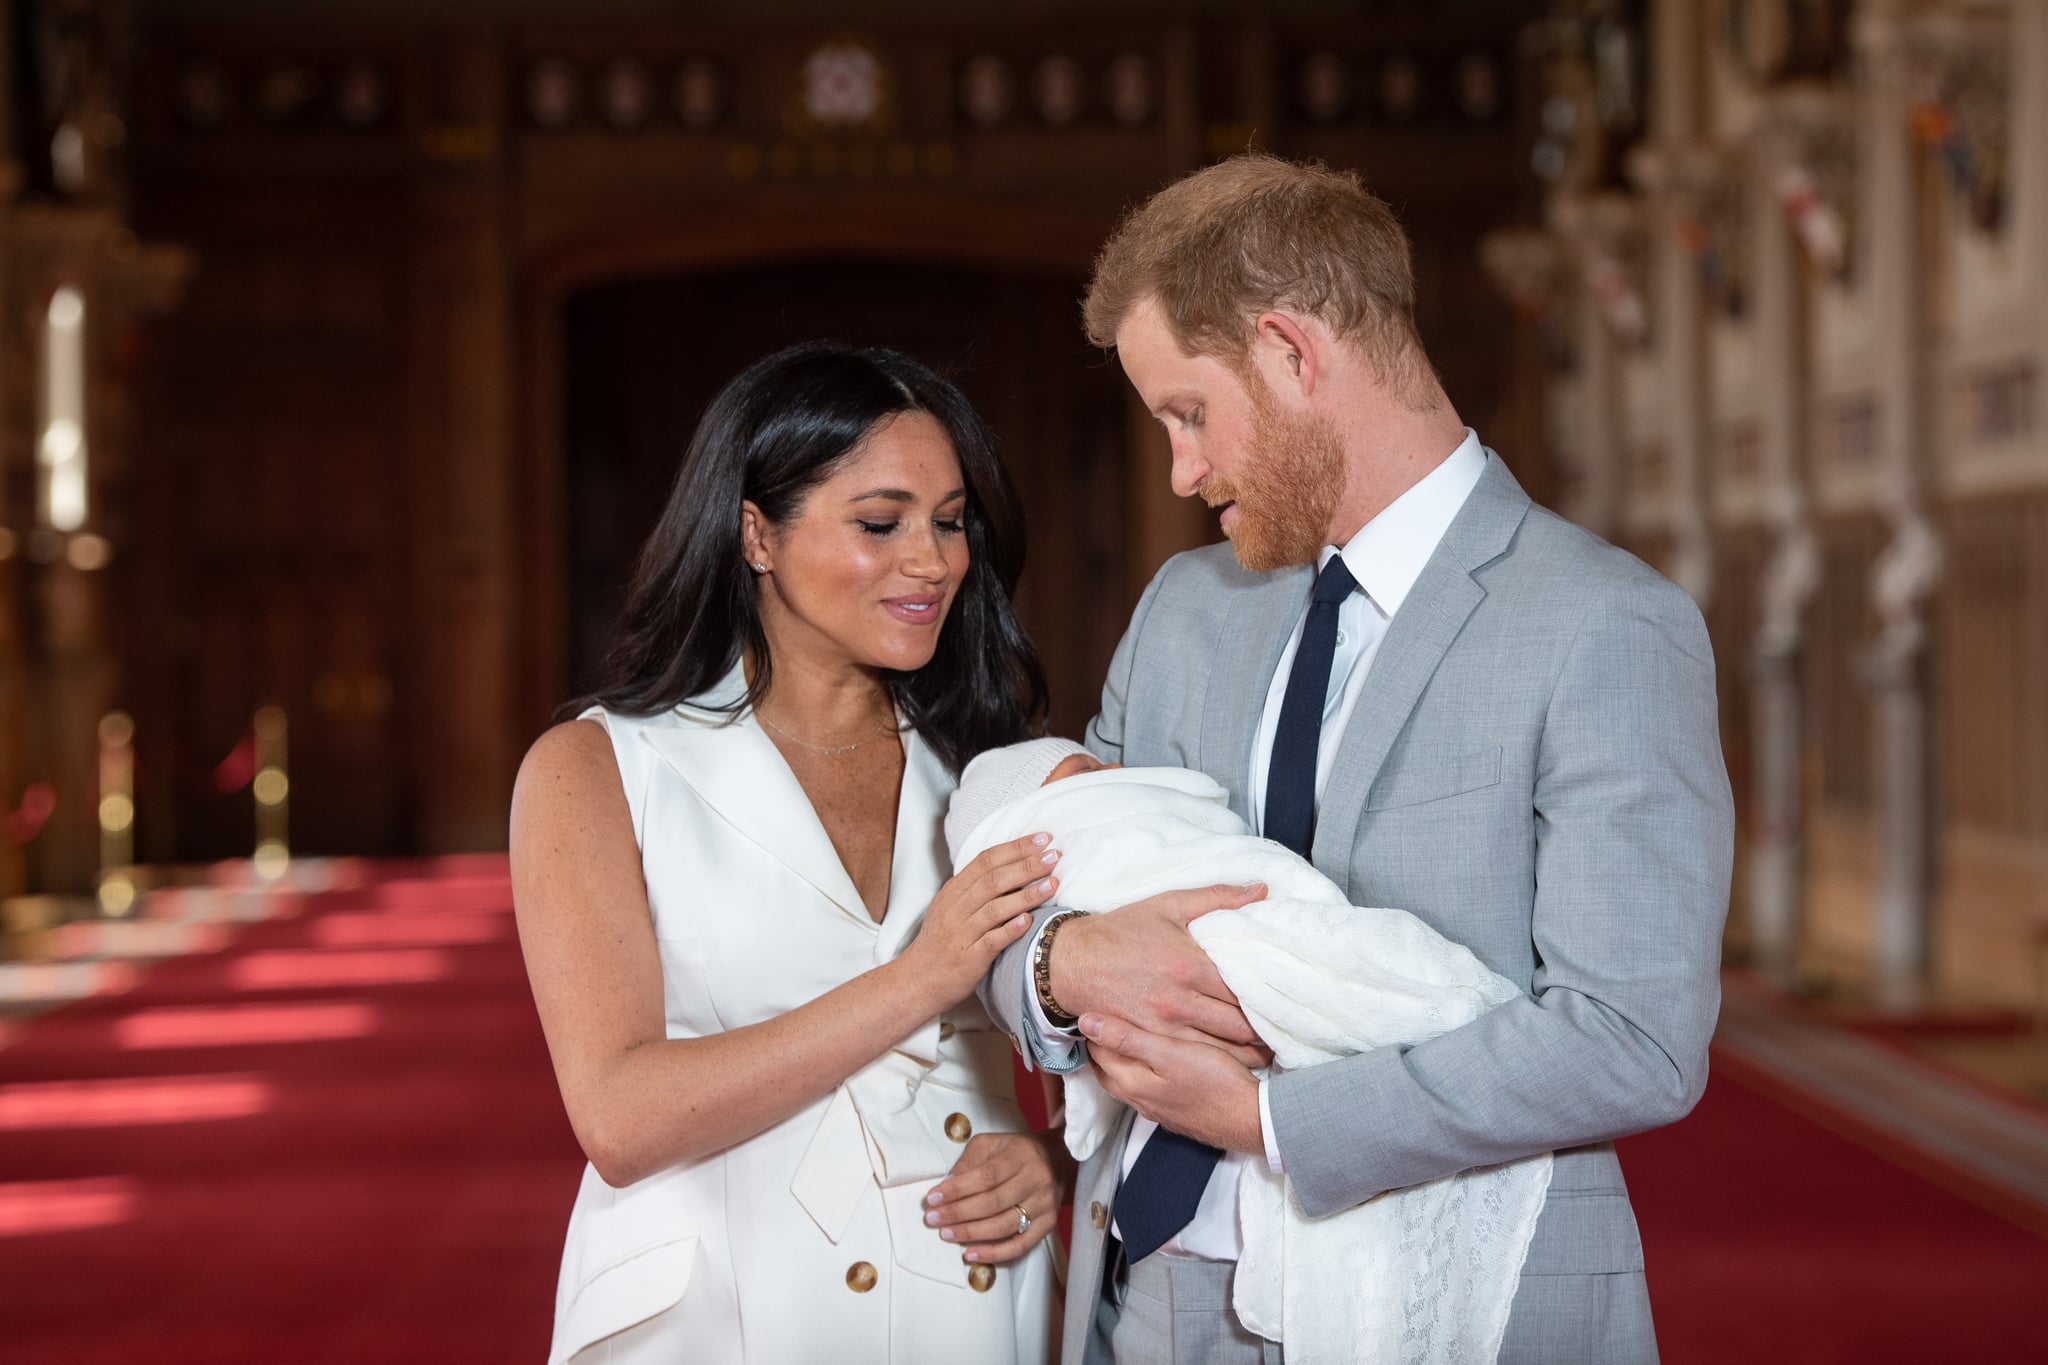 WINDSOR, ENGLAND - MAY 08: Prince Harry, Duke of Sussex and Meghan, Duchess of Sussex, pose with their newborn son Archie Harrison Mountbatten-Windsor during a photocall in St George